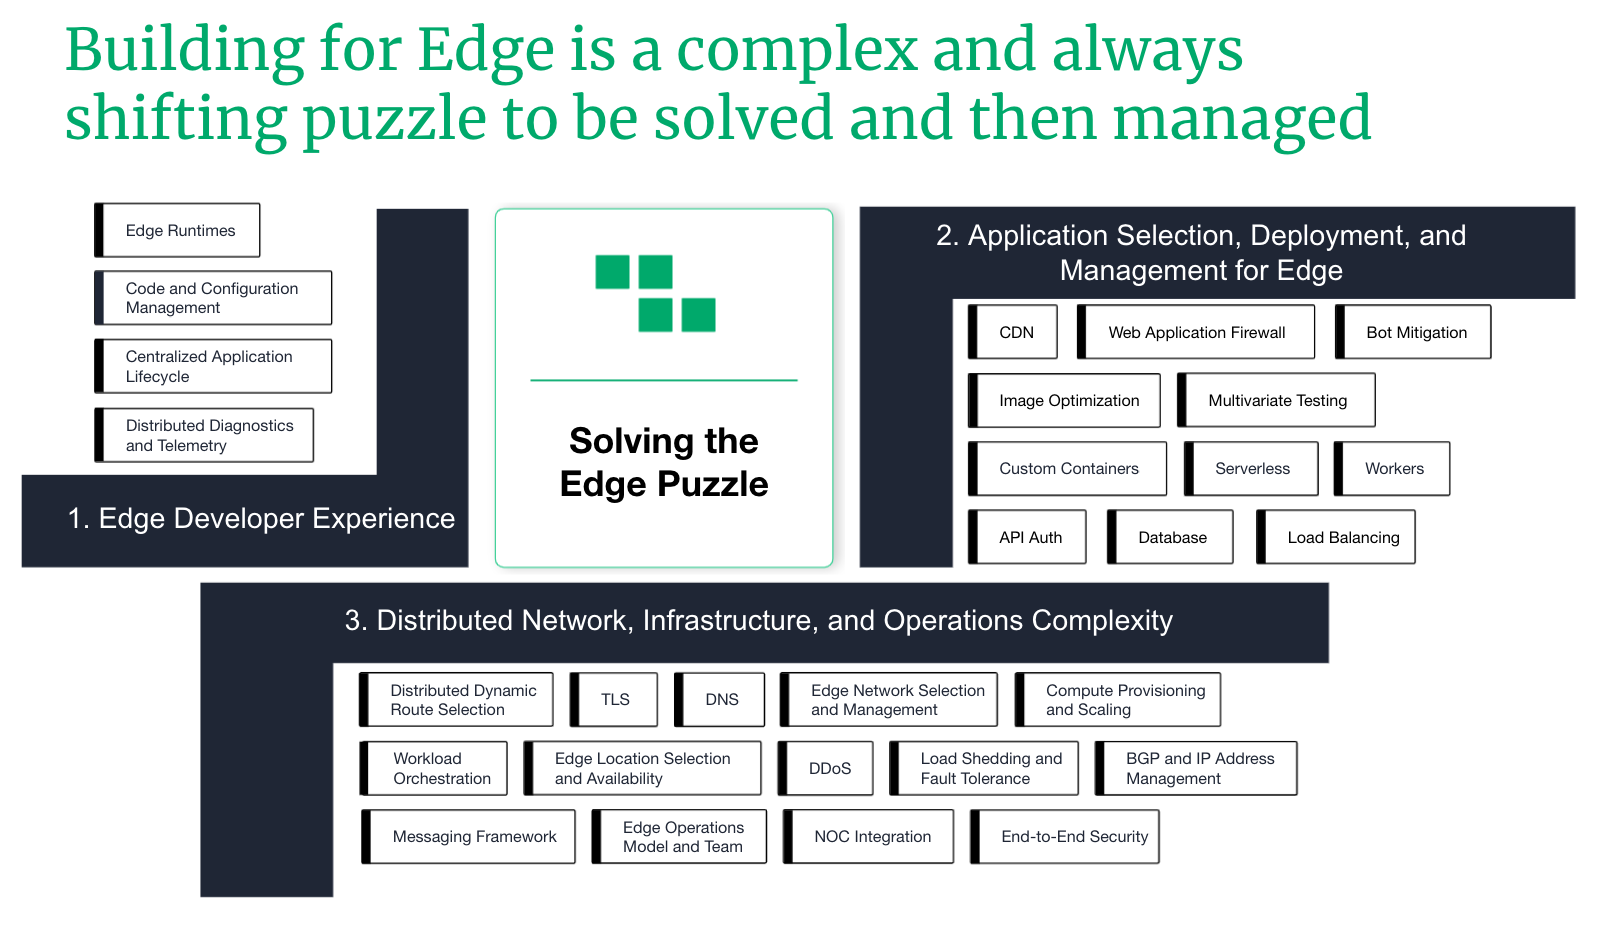 Building for Edge is a complex and always shifting puzzle to be solved.